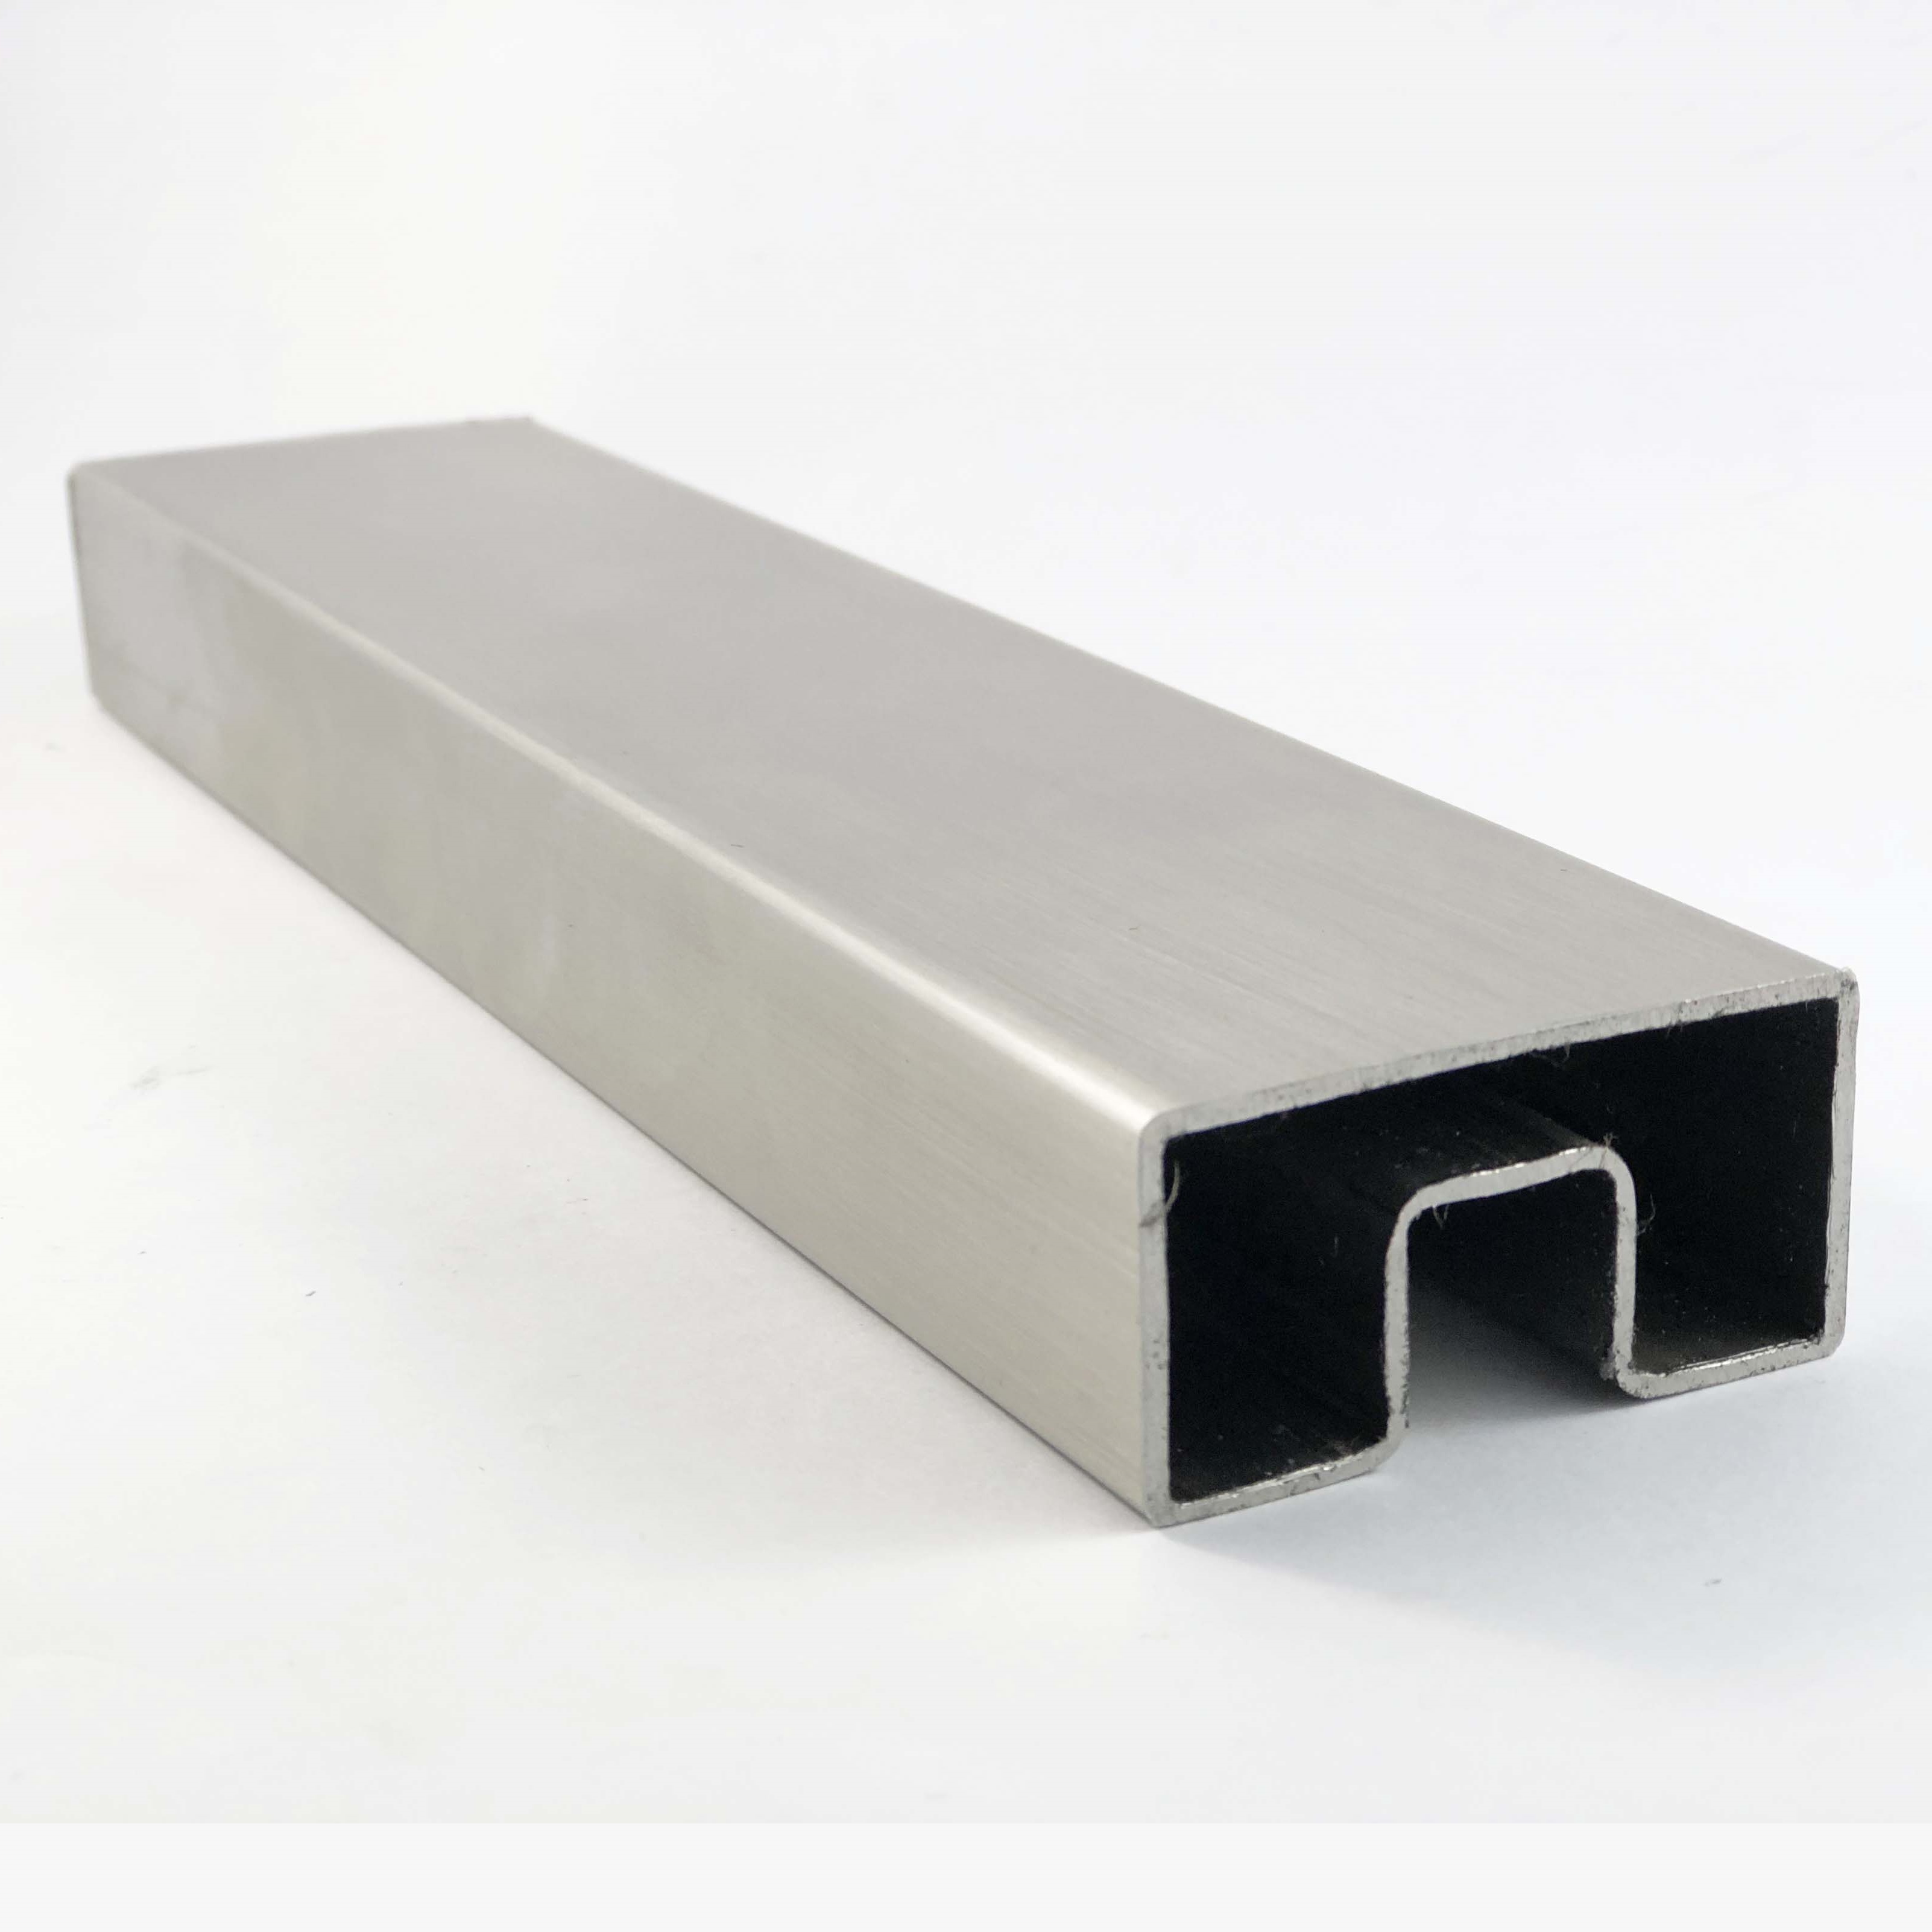 Tube Slotted 25mm x 50mm Stainless Steel 2900mm - Satin